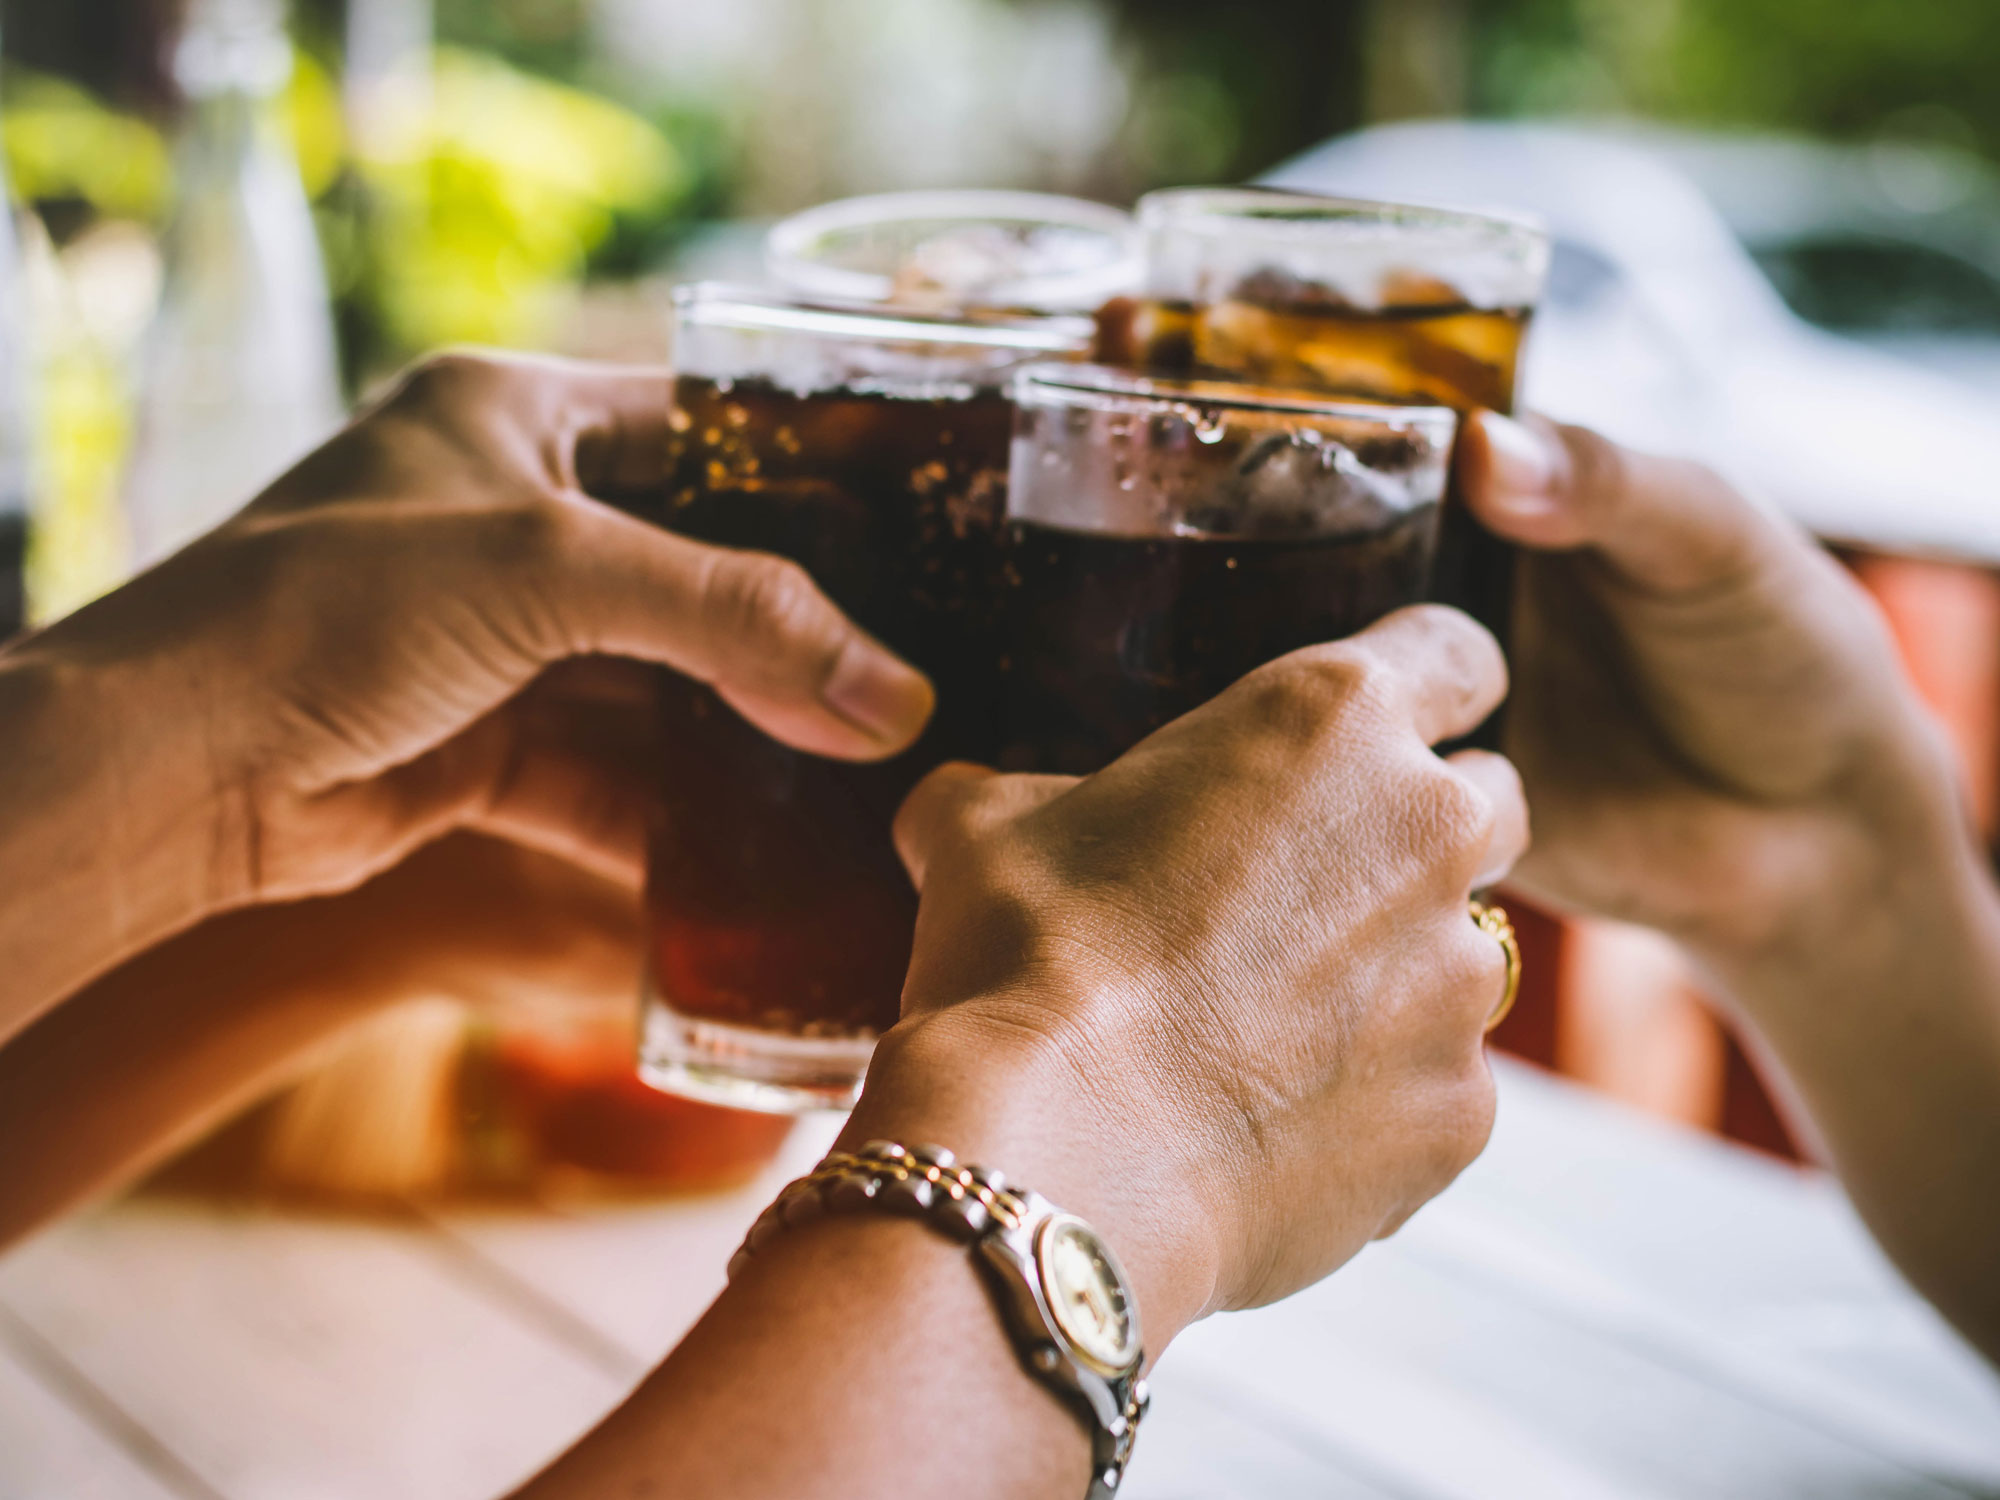 The drinking habit that leads to obesity